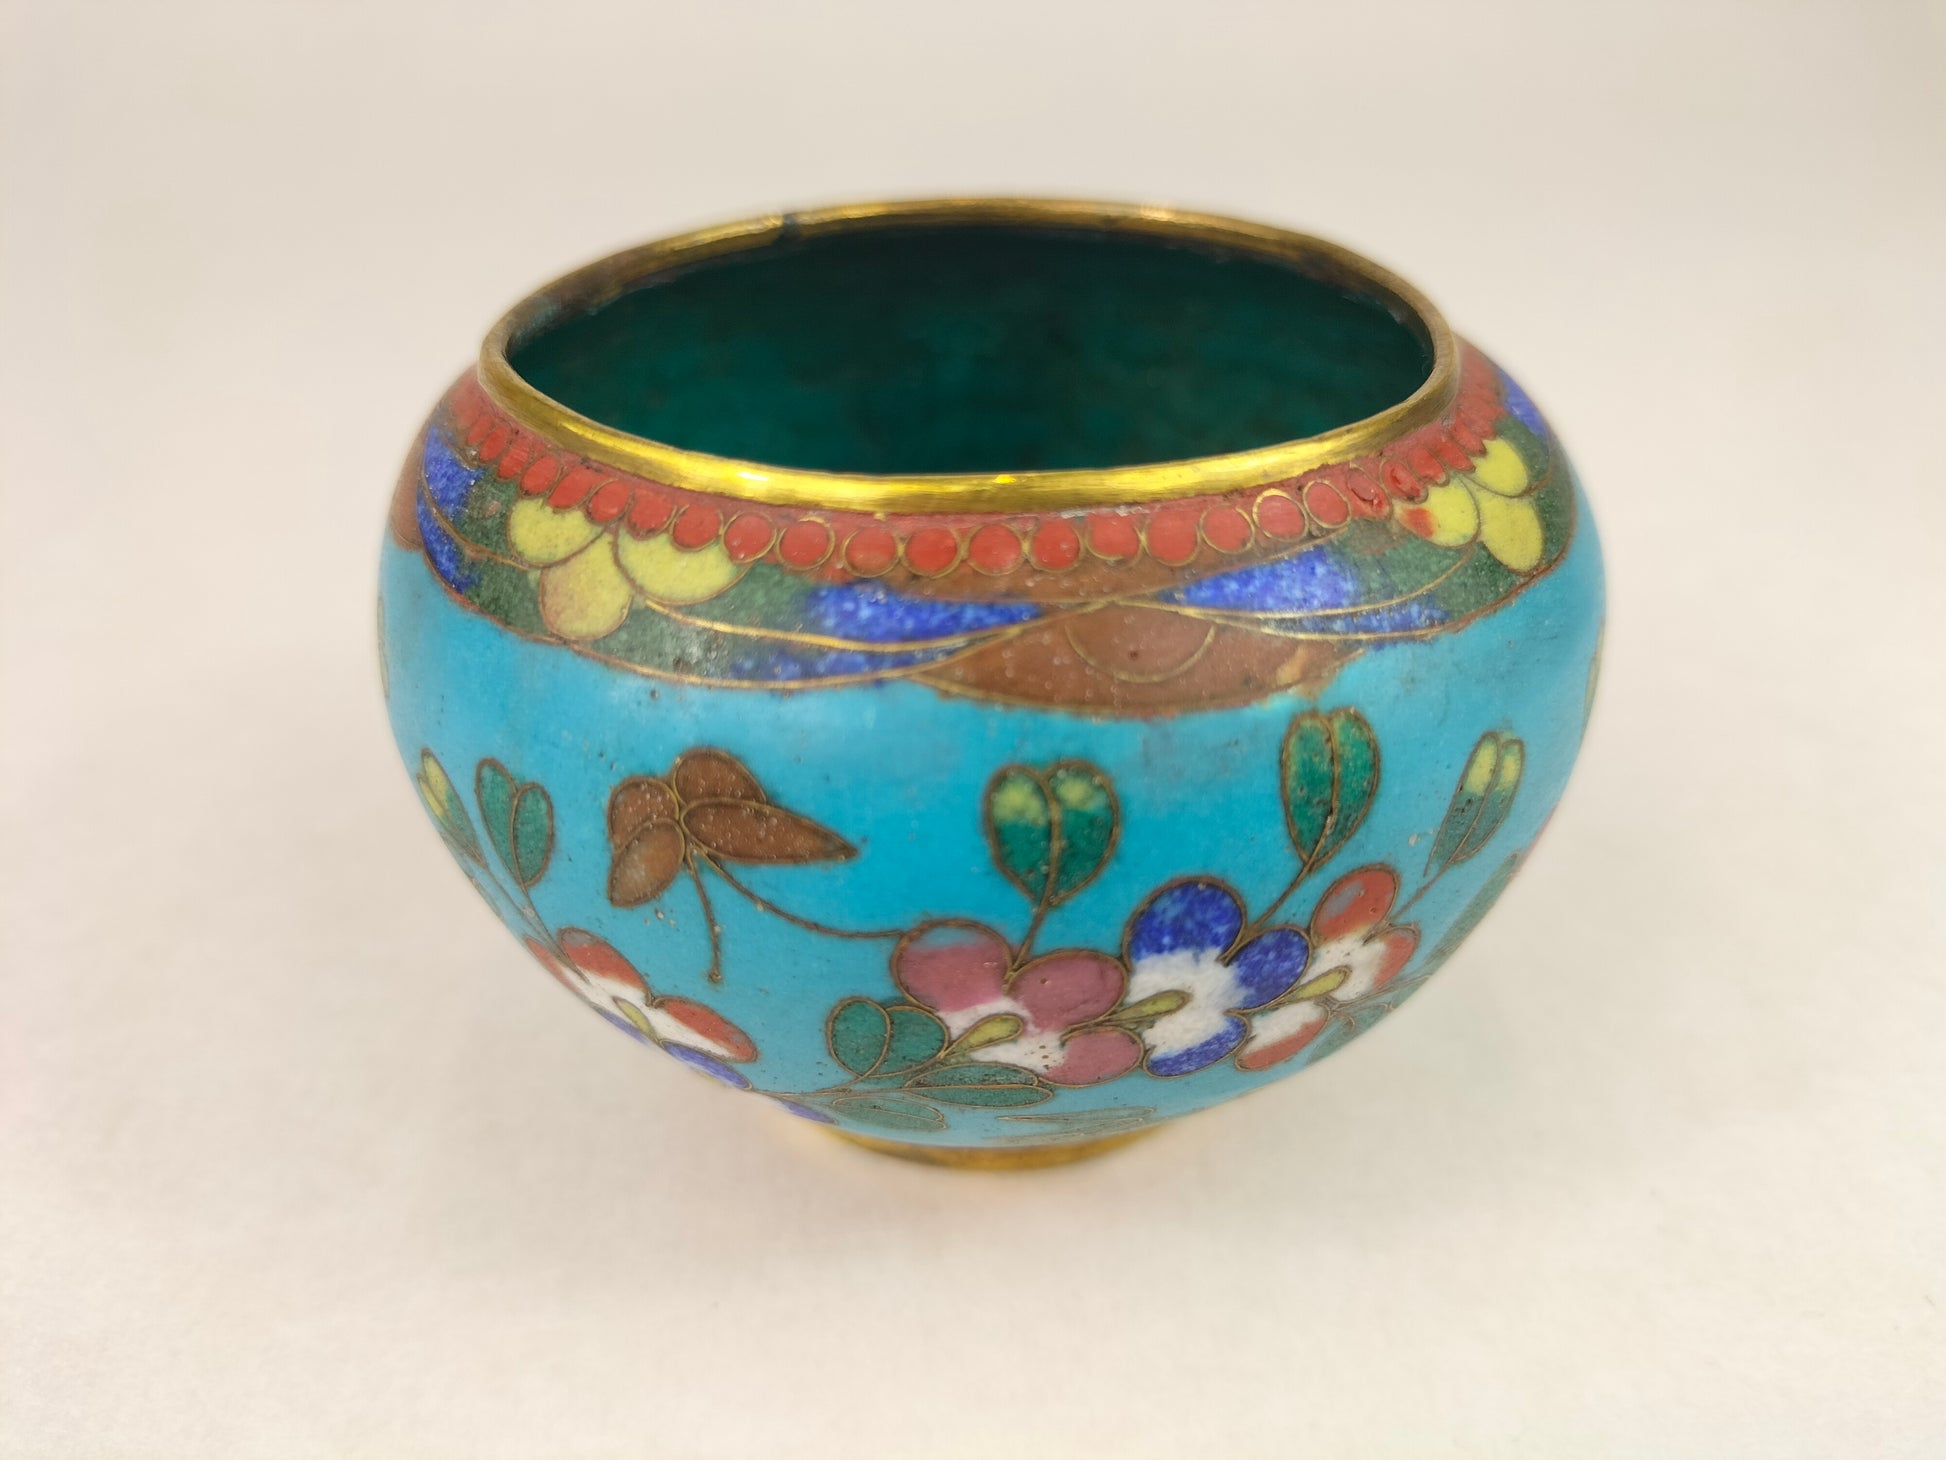 Antique Chinese cloisonne enamel jar decorated with flowers and birds